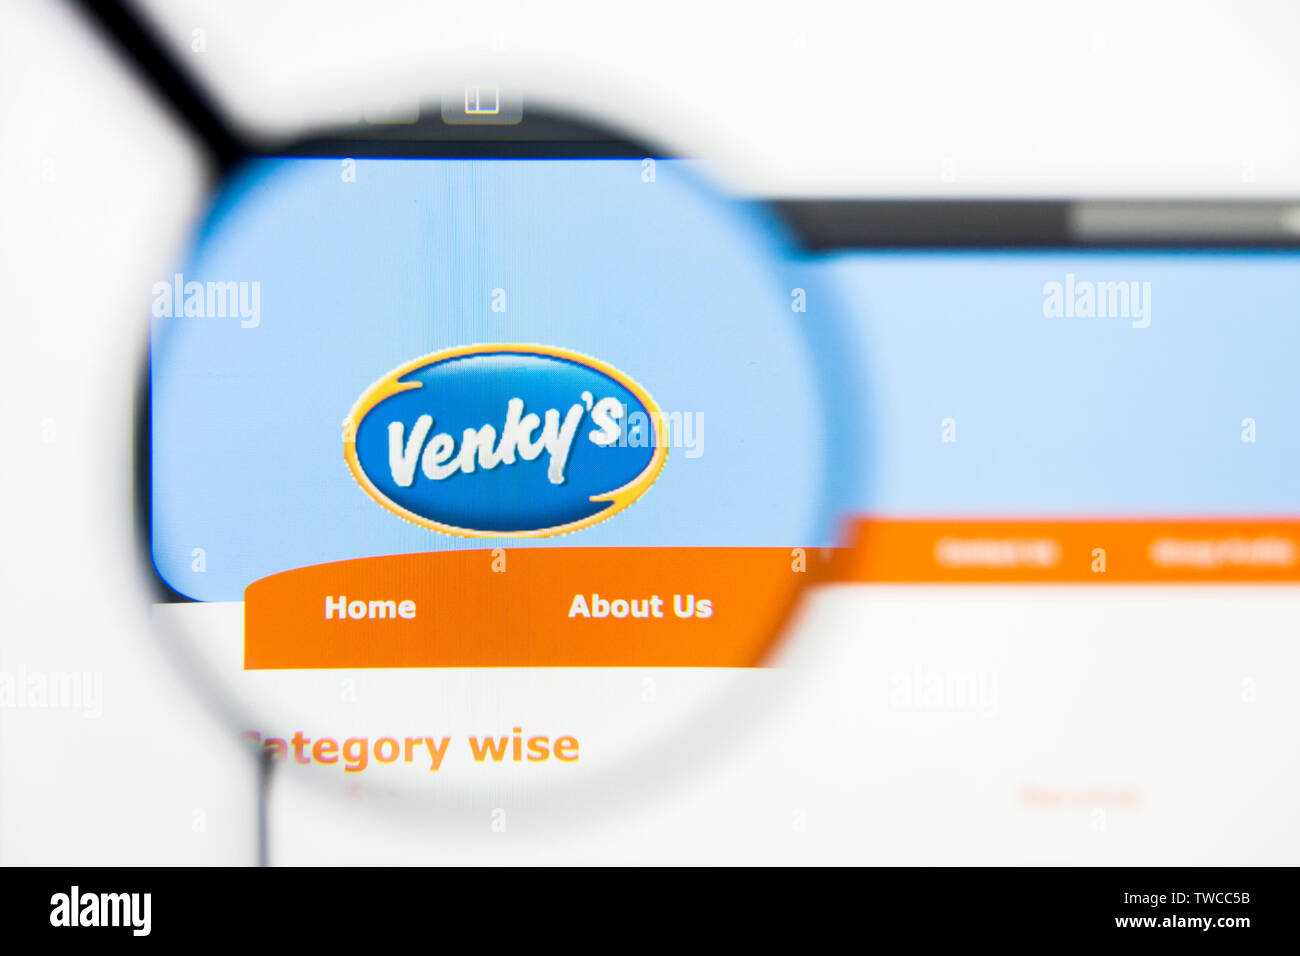 New York, New York State, USA - 19 June 2019: Illustrative Editorial of Venkys India website homepage. Venkys India logo visible on screen. Stock Photo